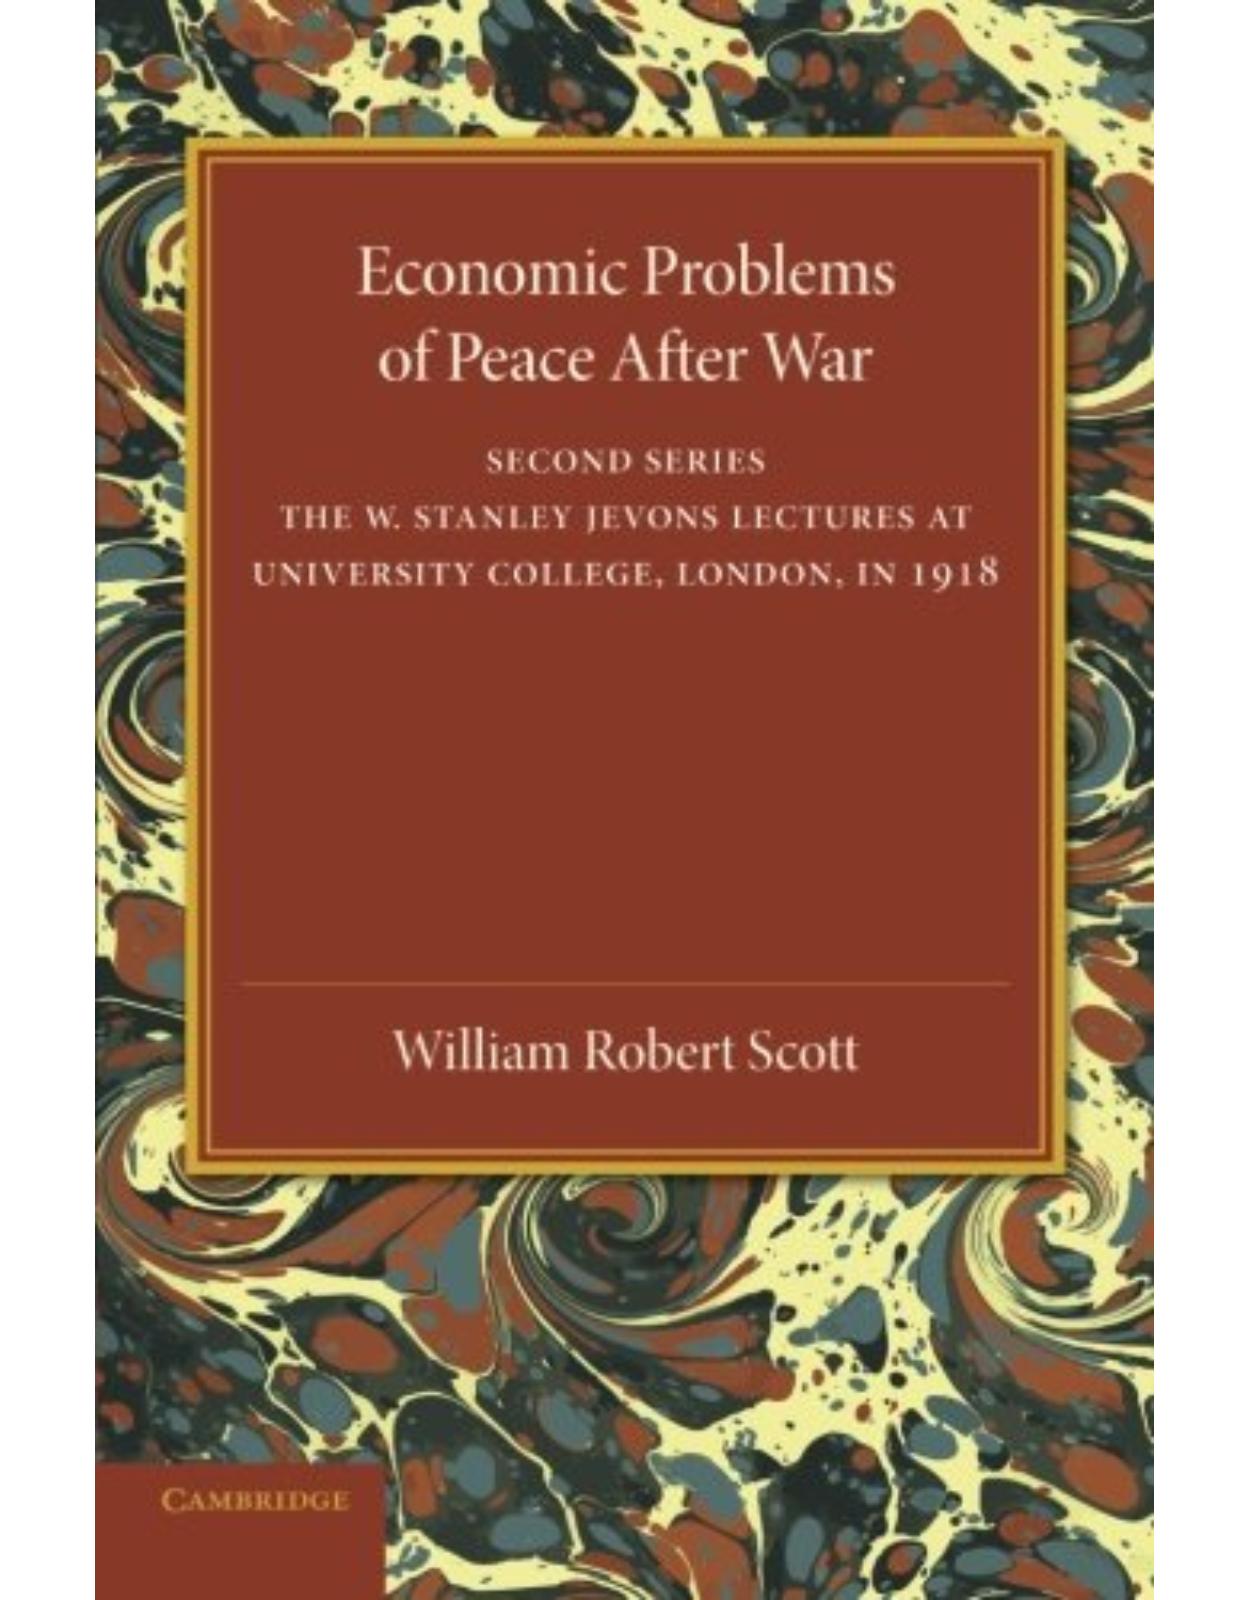 Economic Problems of Peace after War: Volume 2, The W. Stanley Jevons Lectures at University College, London, in 1918